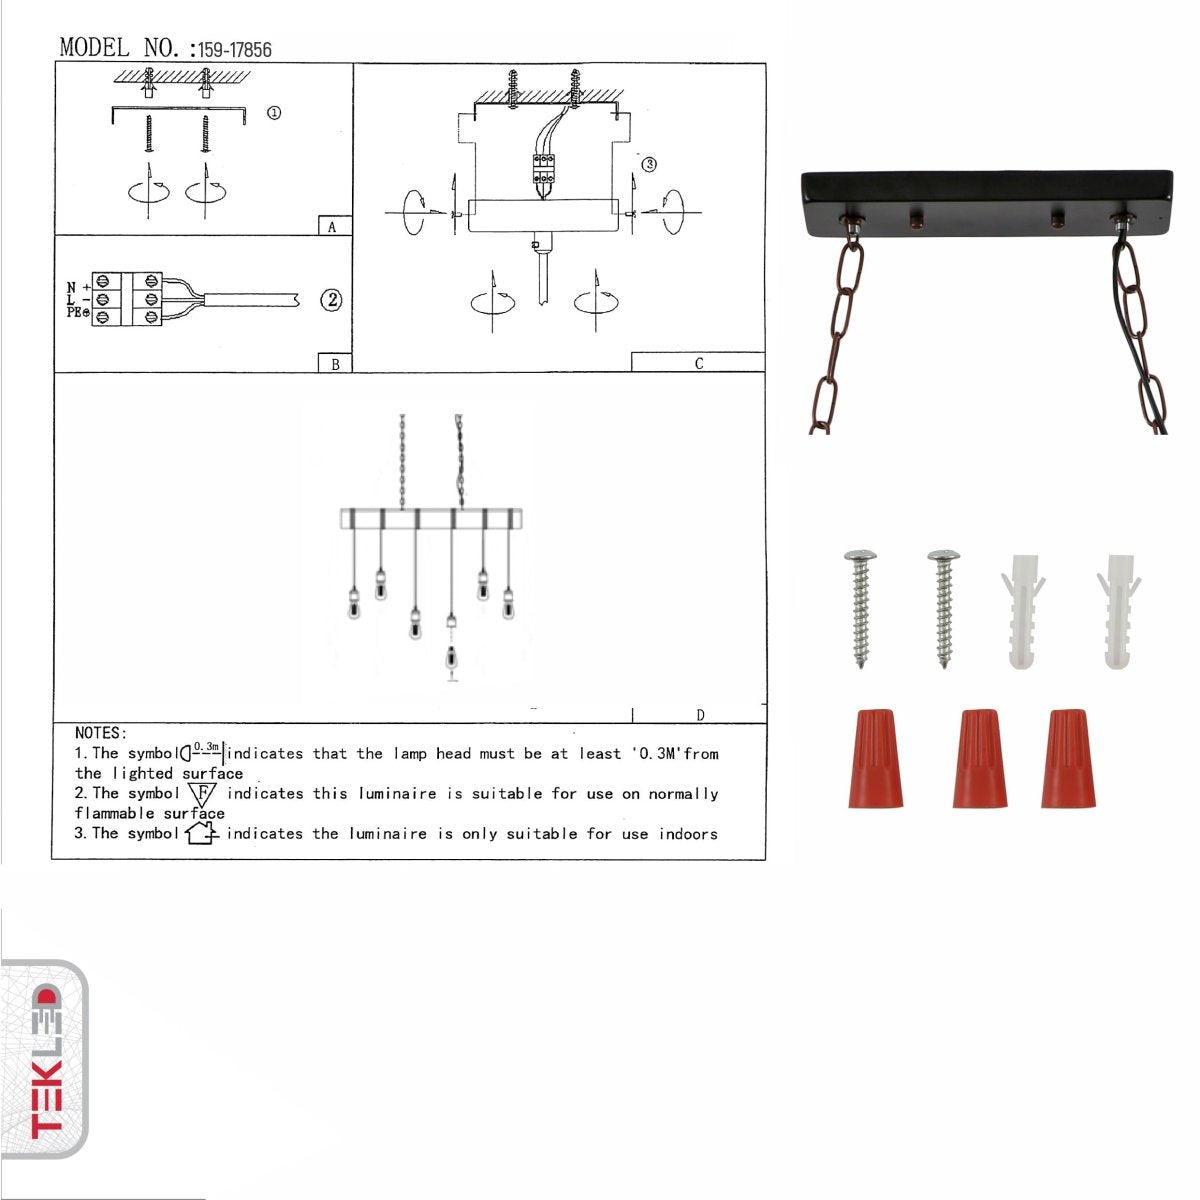 User manual for Timber Iron and Wood Island Chandelier 6xE27 | TEKLED 159-17856